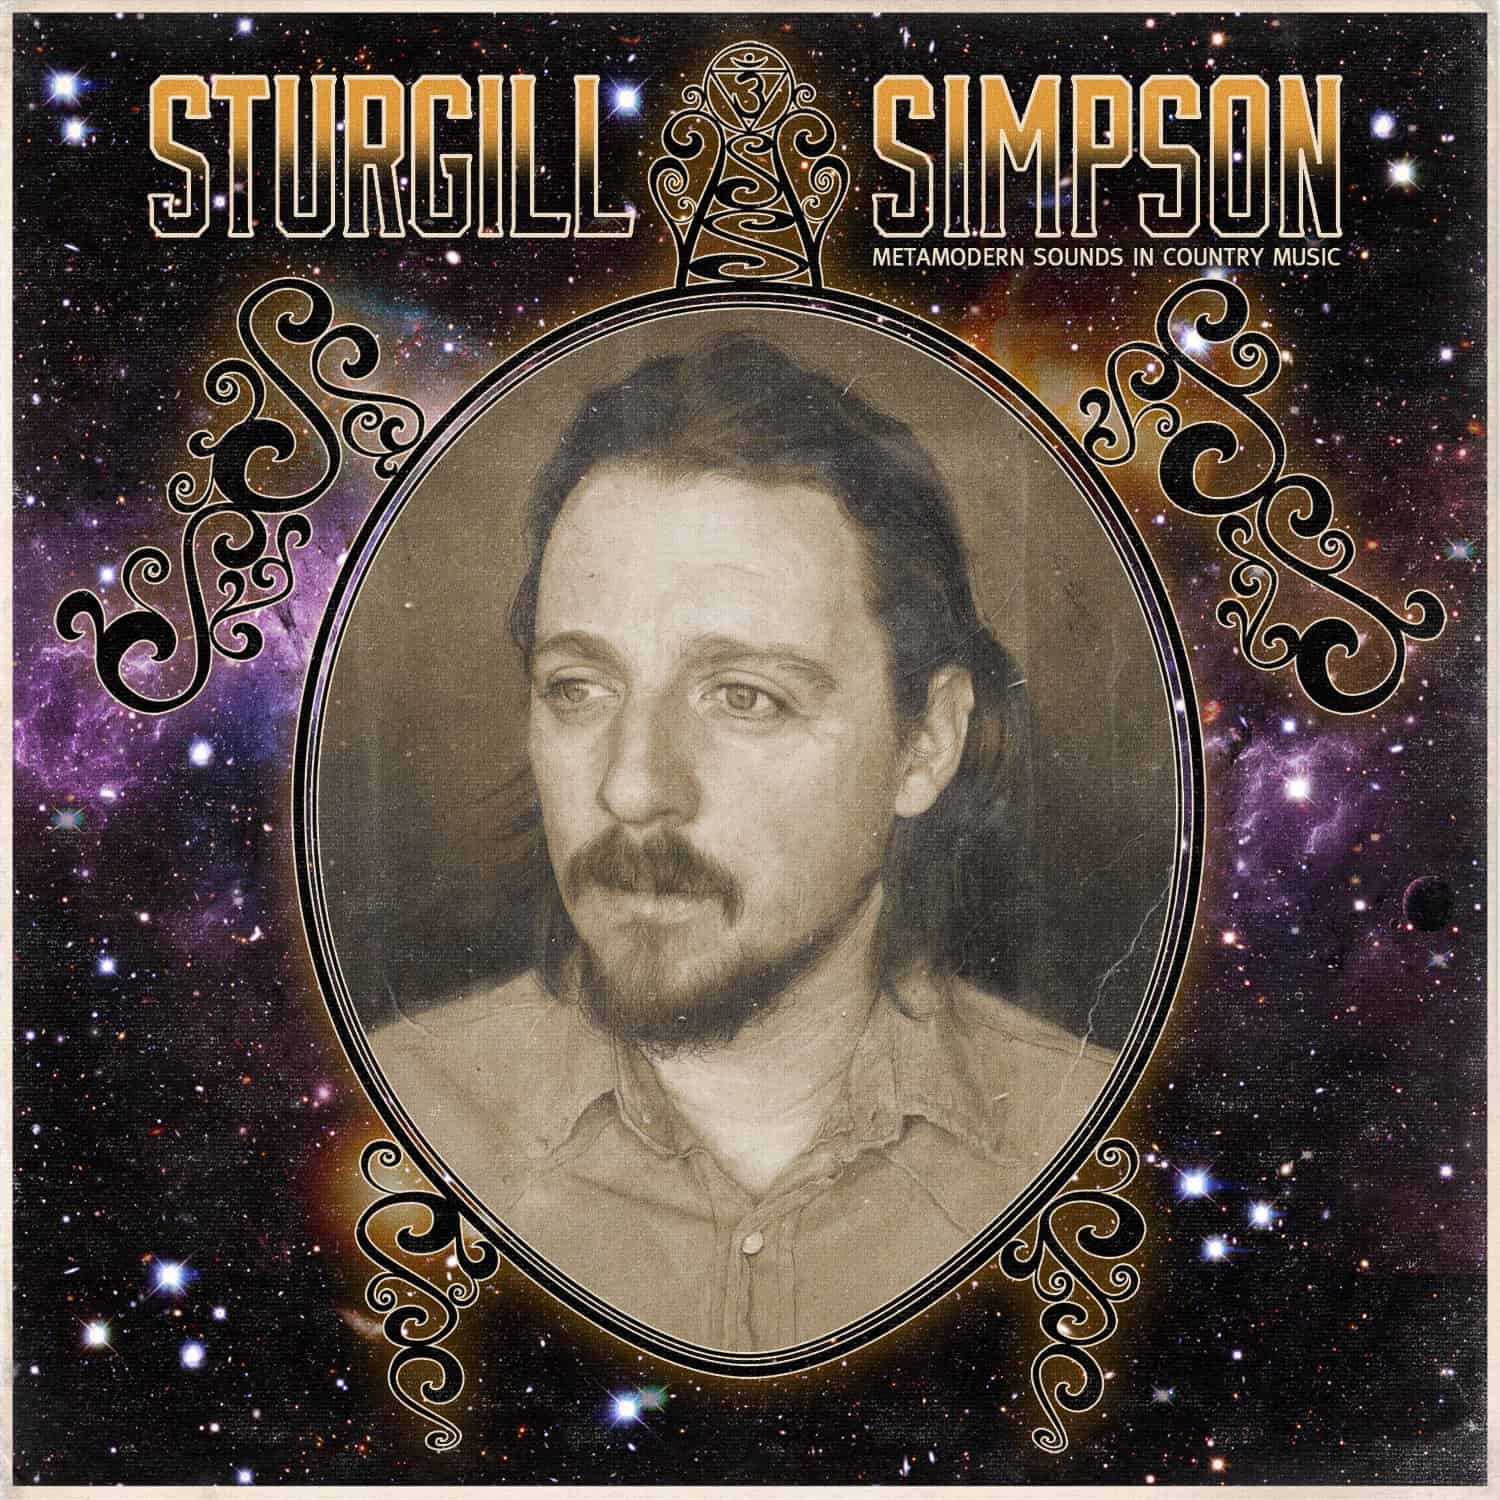 Sturgill-Simpson-Metamodern-Sounds-In-Country-Music-vinyl-LP-record-album-front